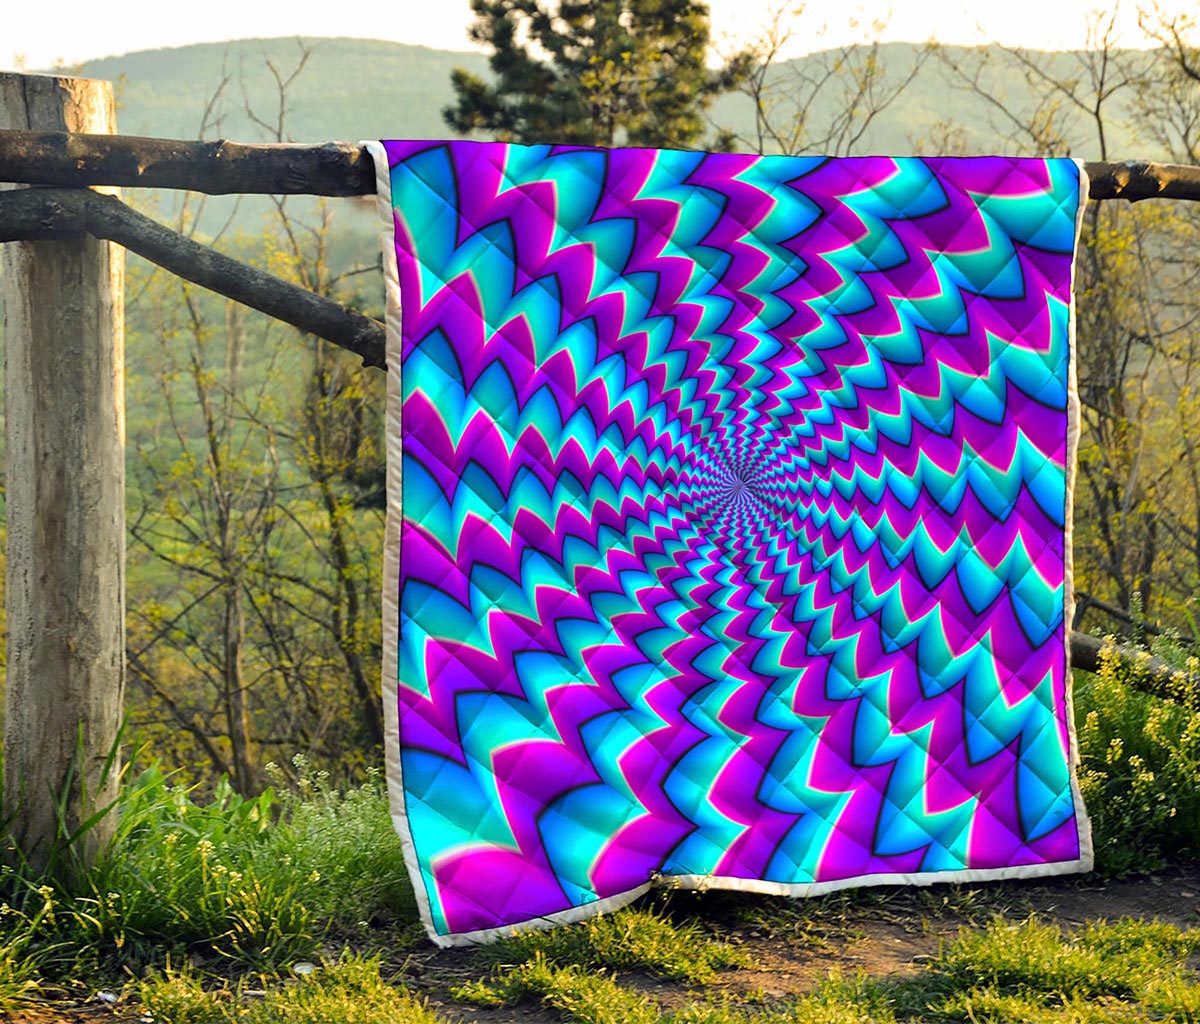 Blue Dizzy Moving Optical Illusion Quilt